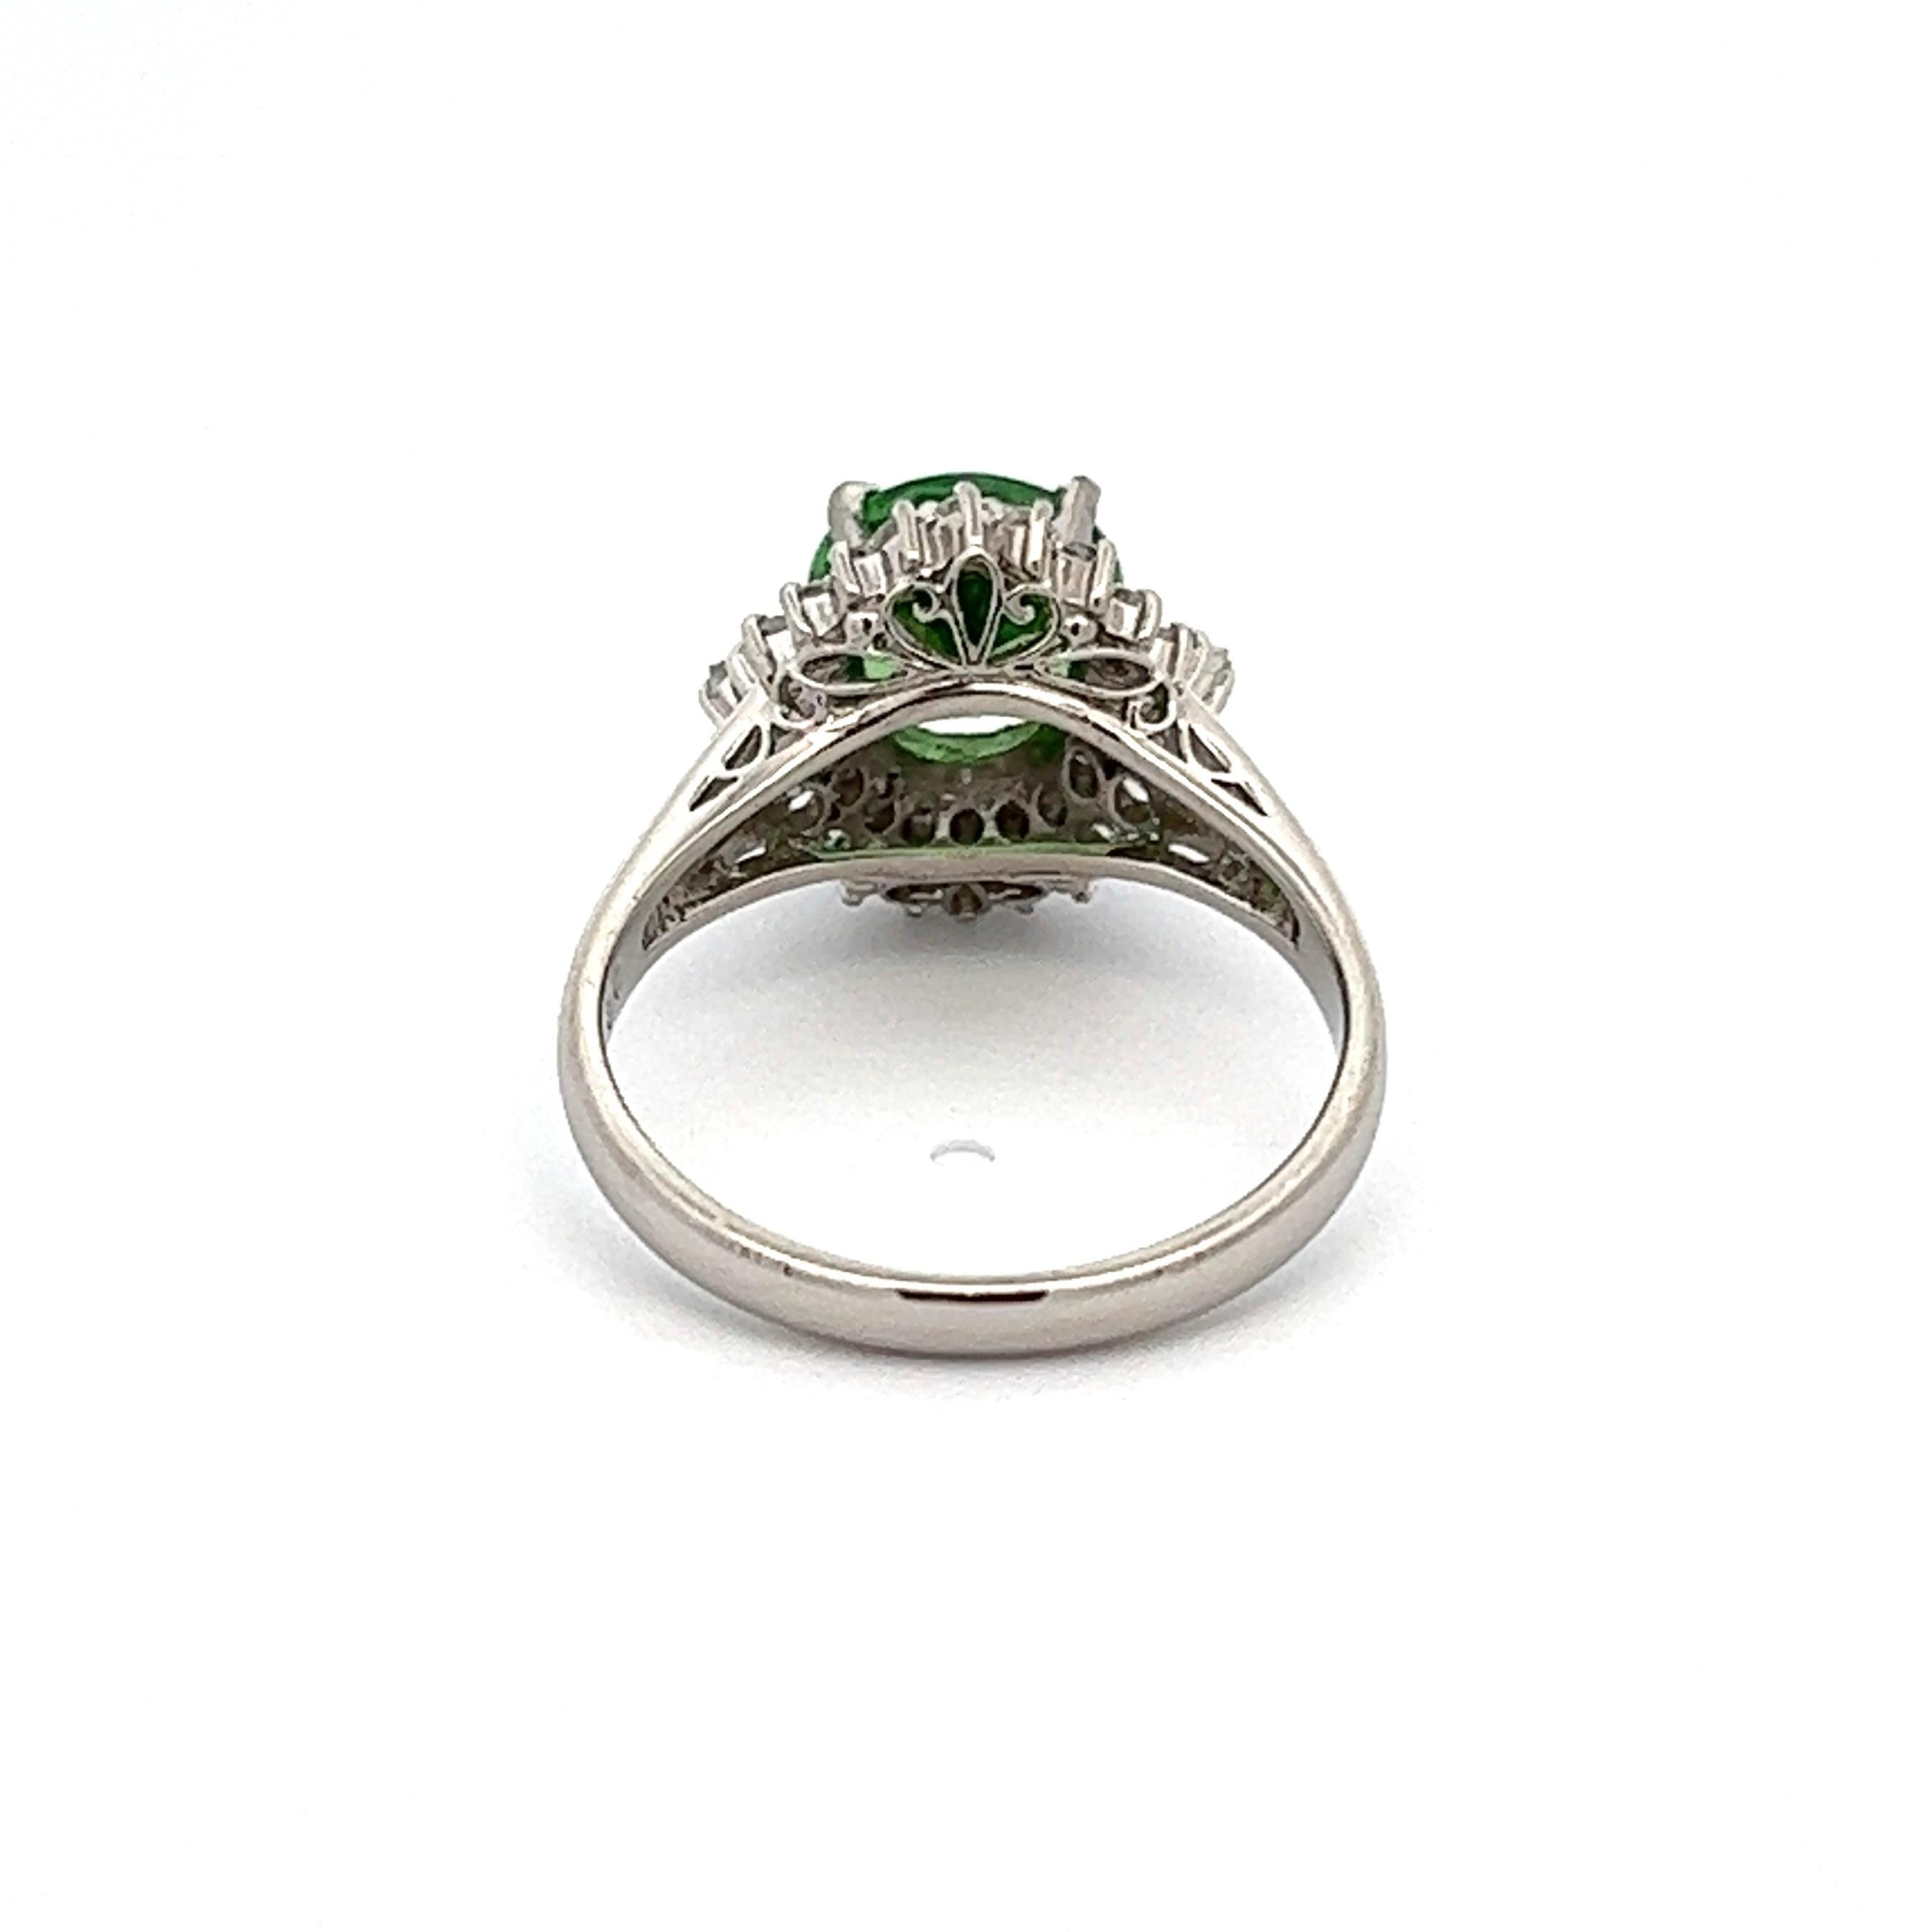 1.84 Carat Round Tsavorite Garnet and Diamond Platinum Ring In Excellent Condition For Sale In Montreal, QC